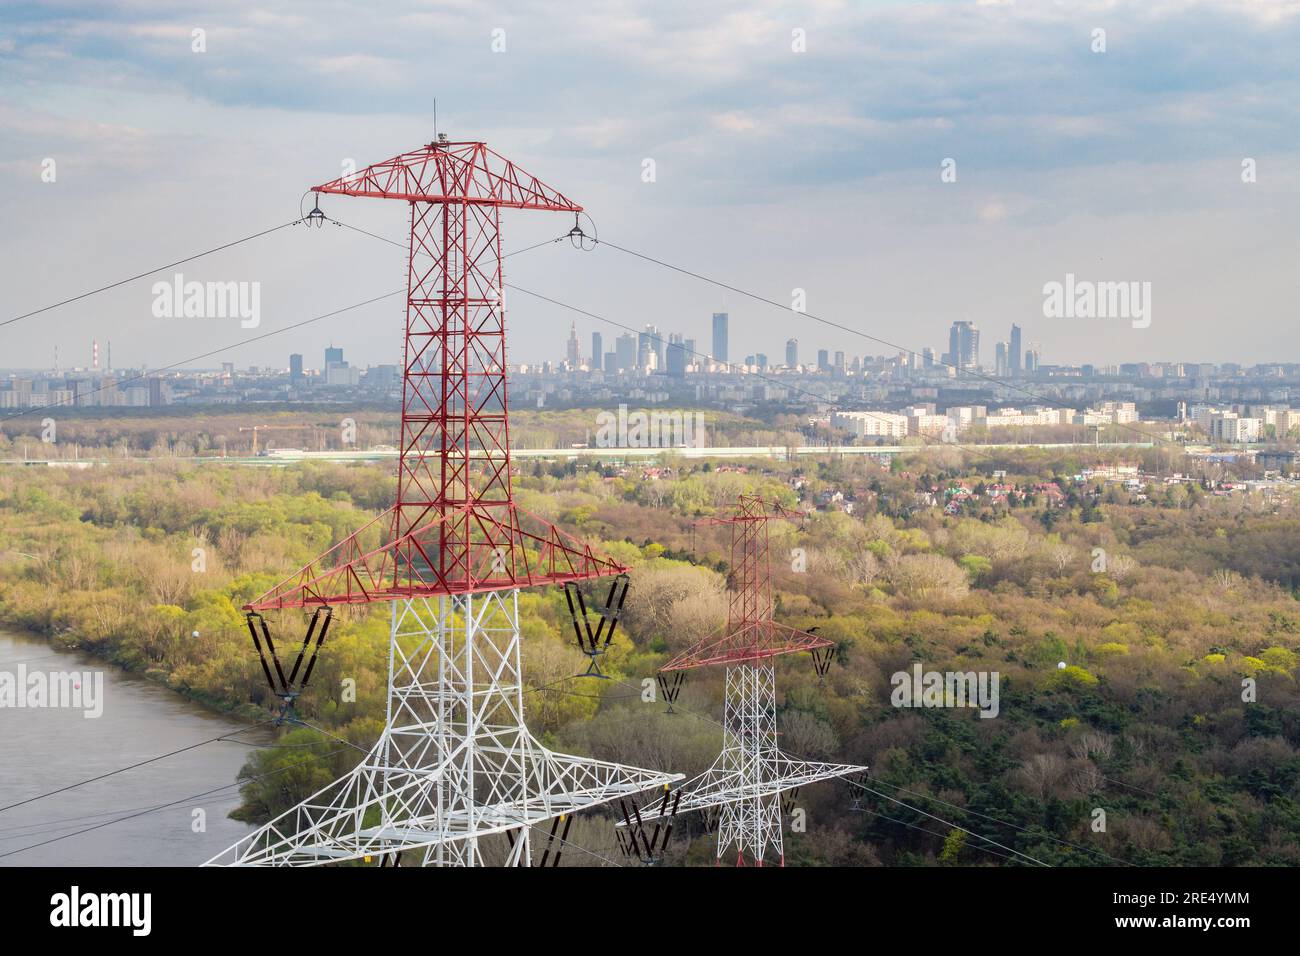 Aerial view of electricity pylon and high voltage line against city center Stock Photo